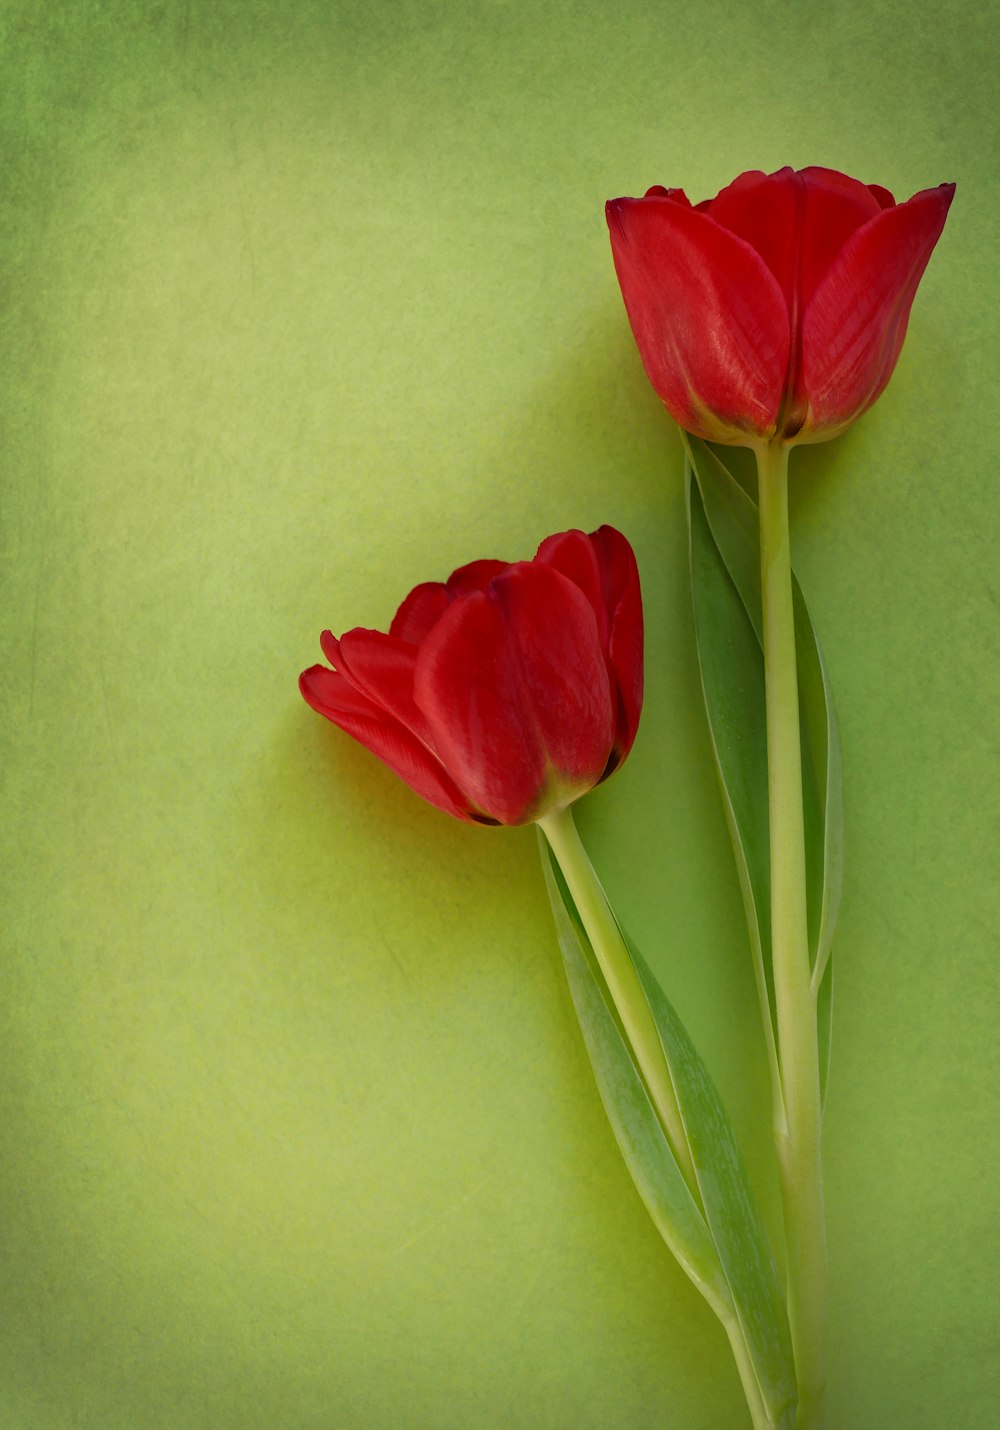 two red tulips on a green background